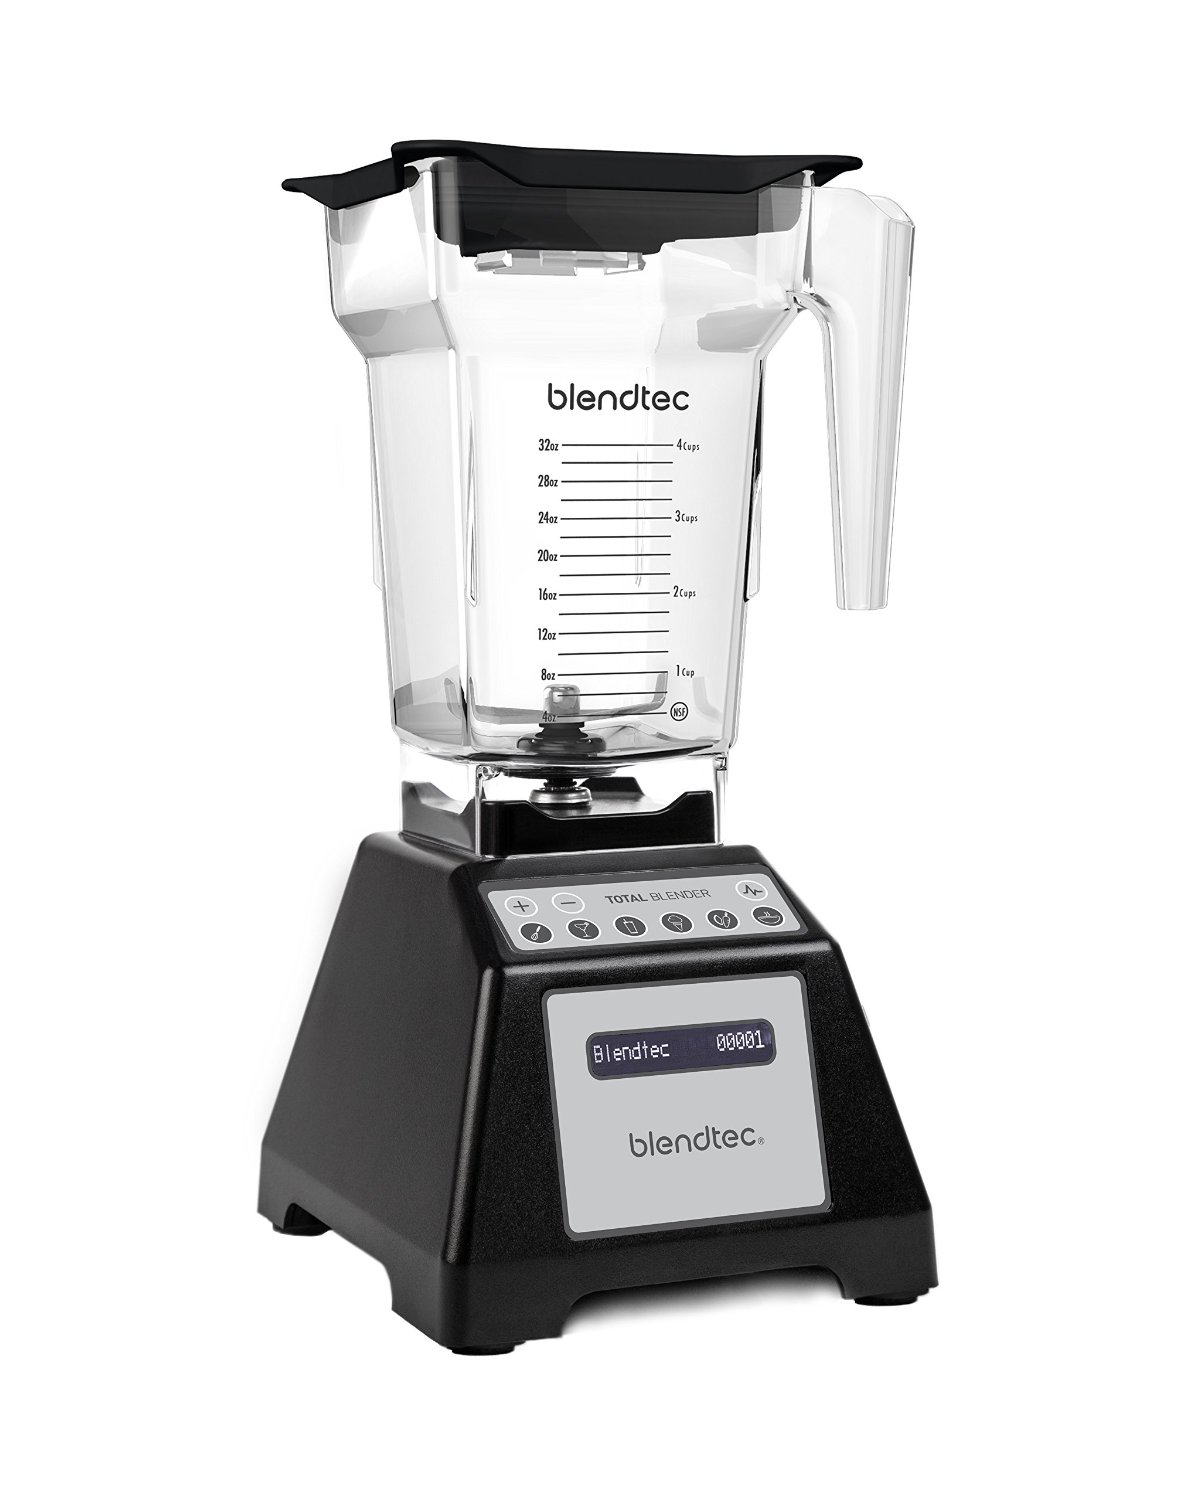 Top 10 Best Blenders For Smoothies